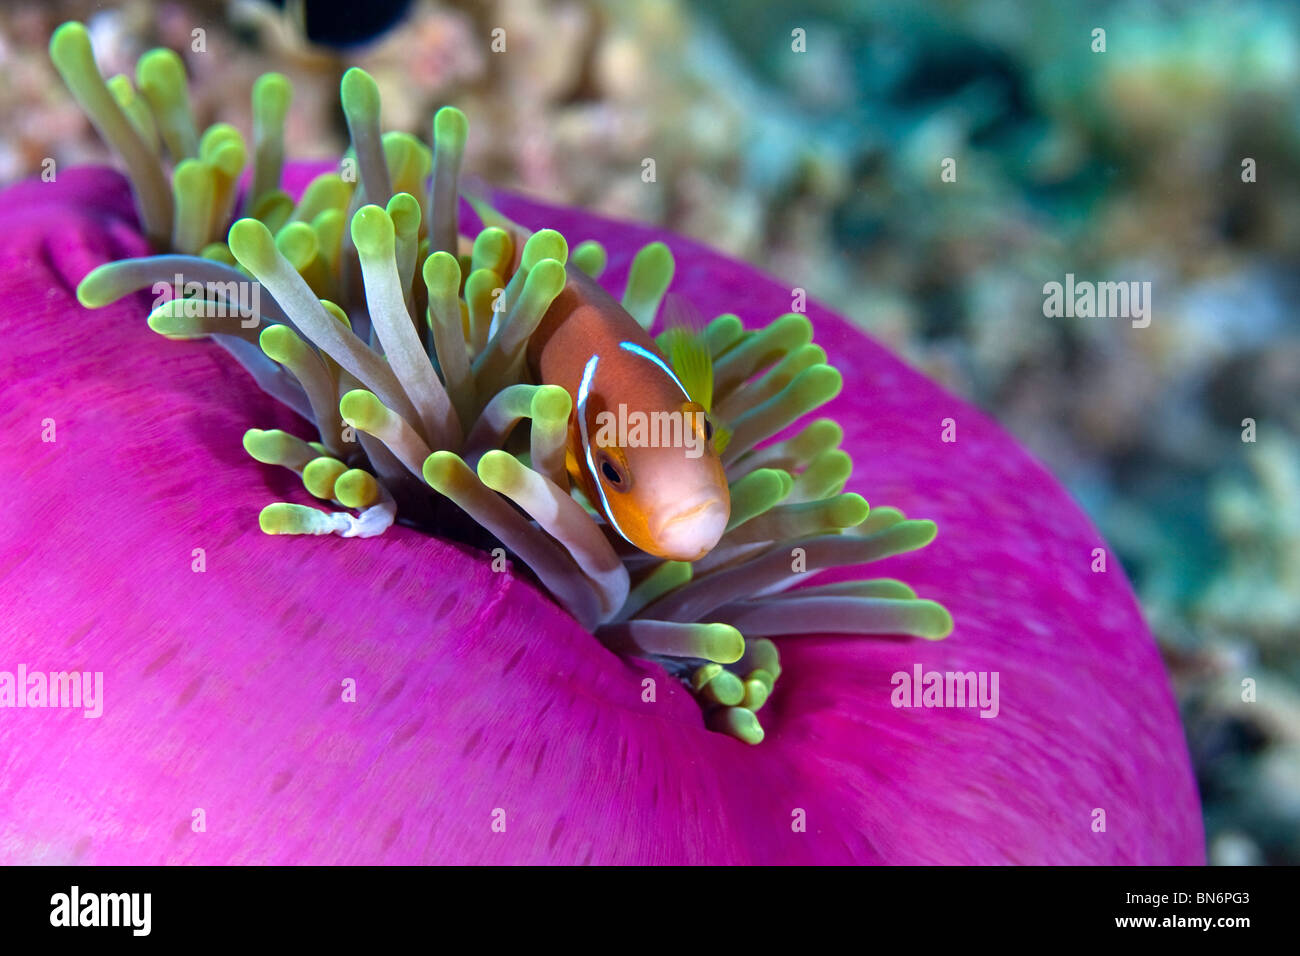 Maldives anemonefish or clown fish in purple and green anemone swimming through the tentacles looking at the camera. Stock Photo